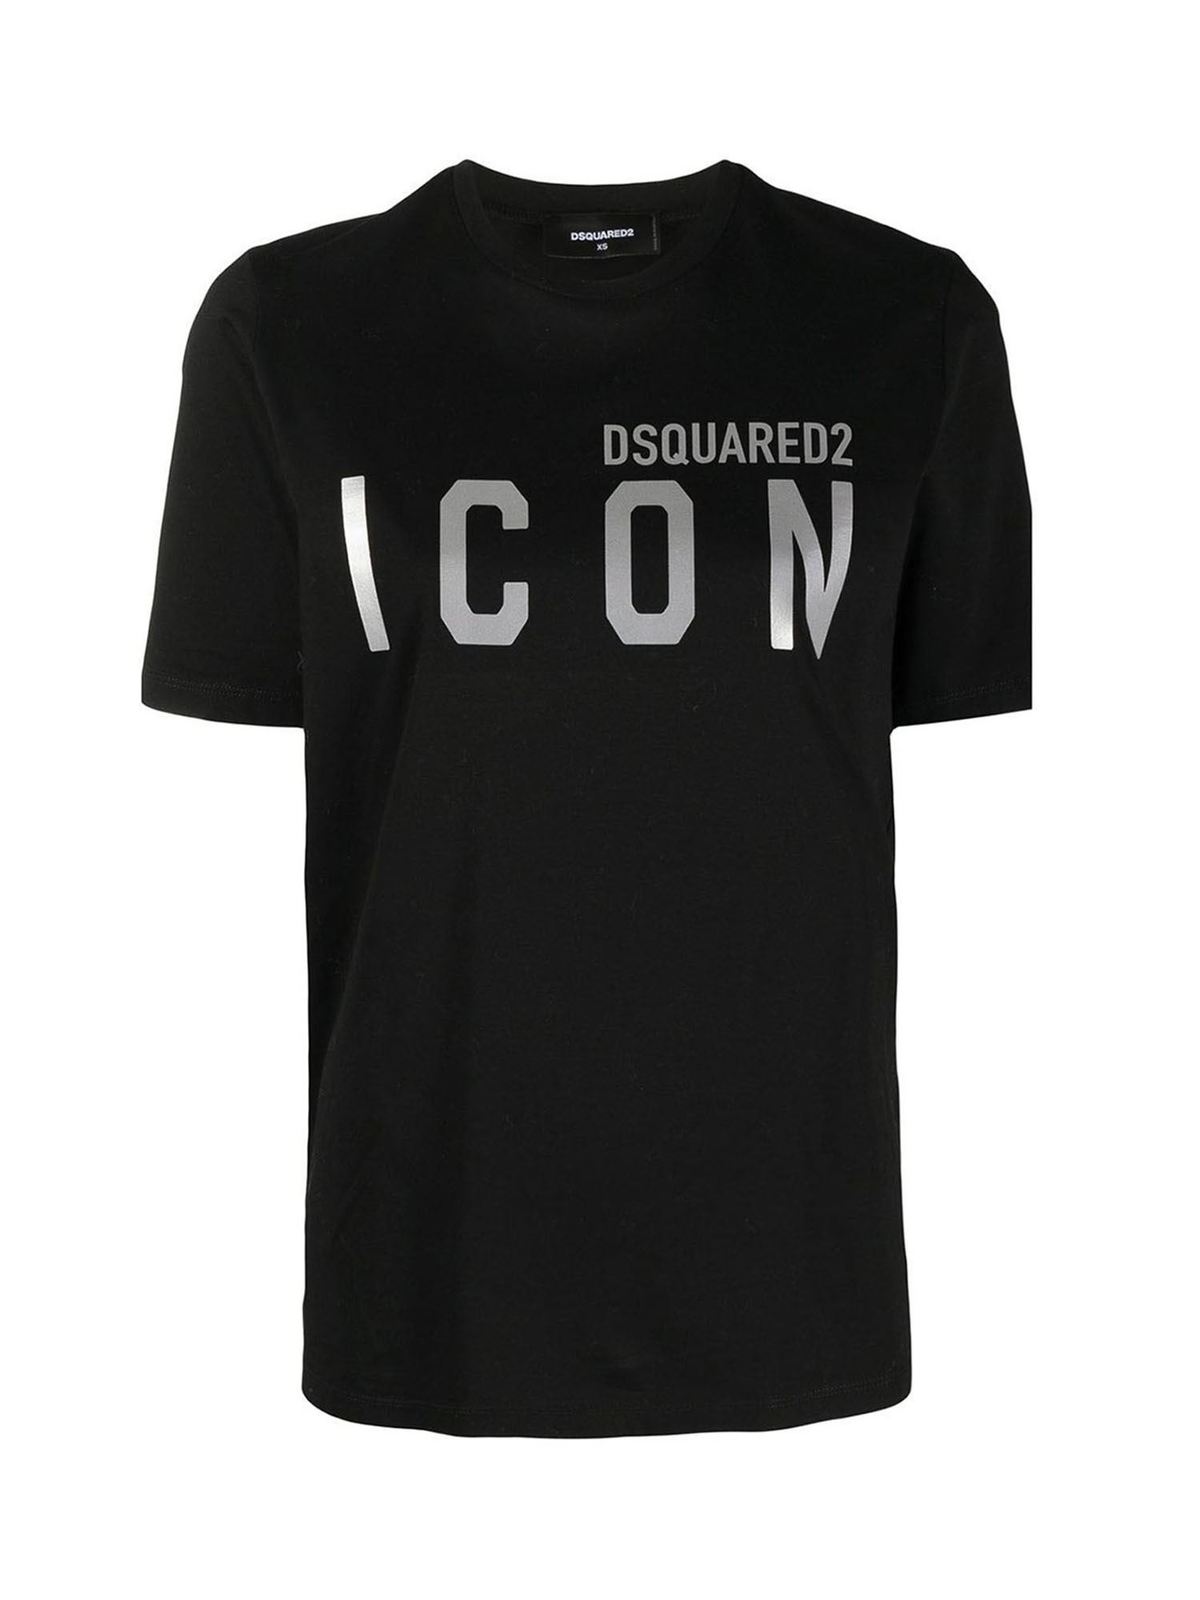 DSQUARED2 REFLECTIVE ICON T-SHIRT IN BLACK